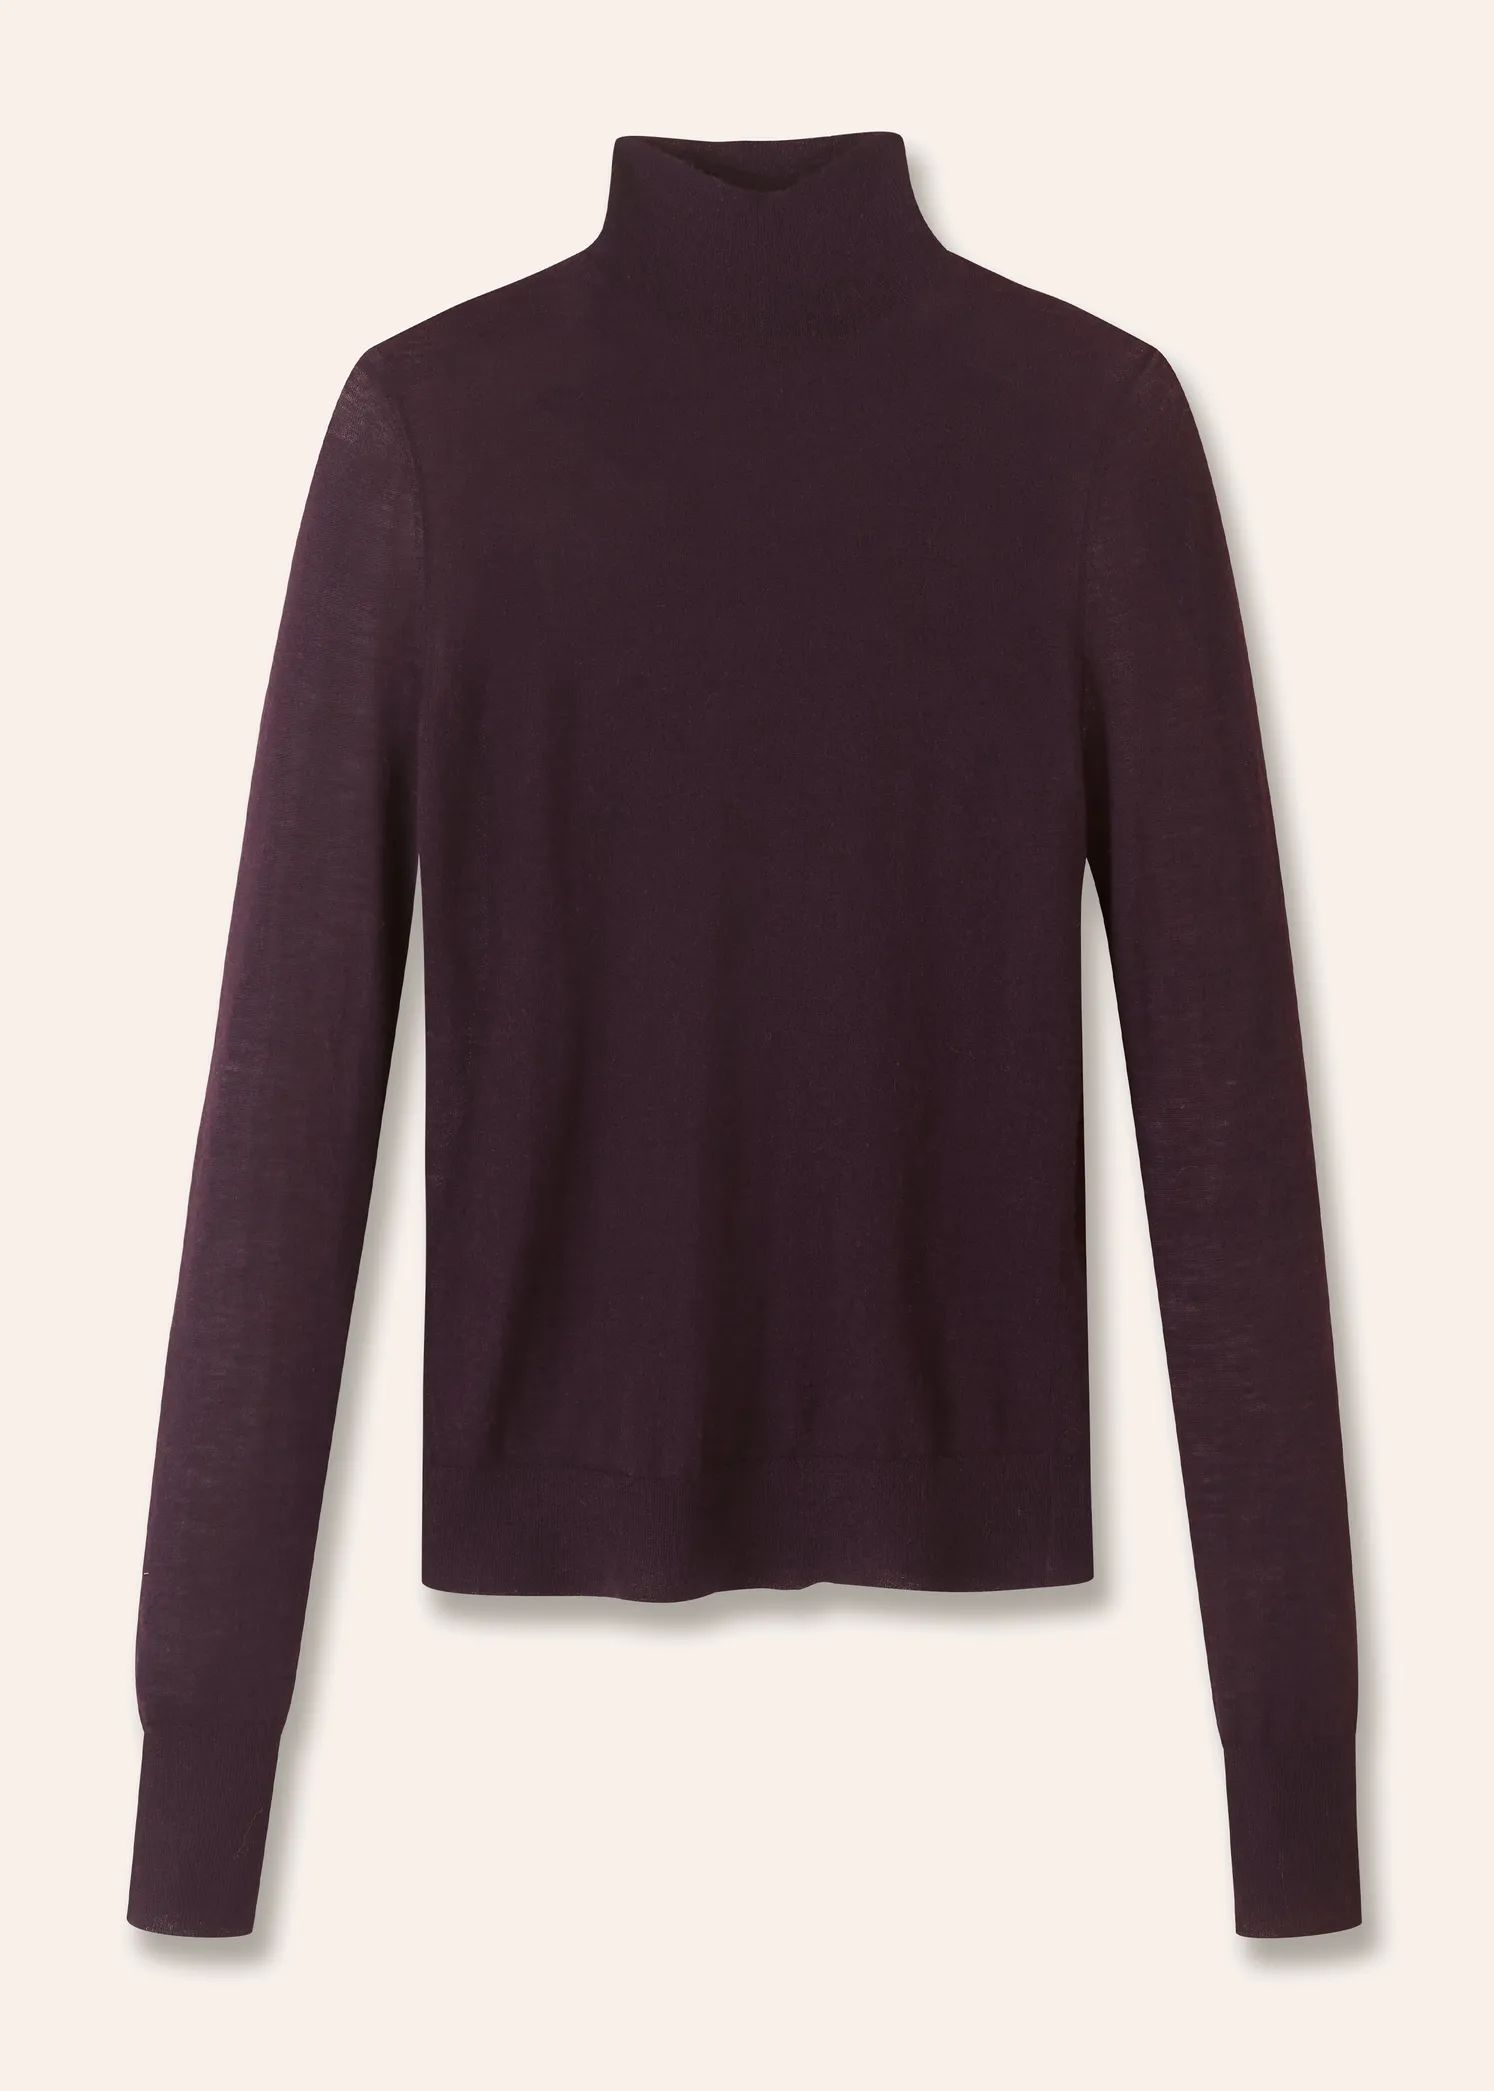 Cashmere Barely There Layering Jumper | ME+EM Global (Excluding US)